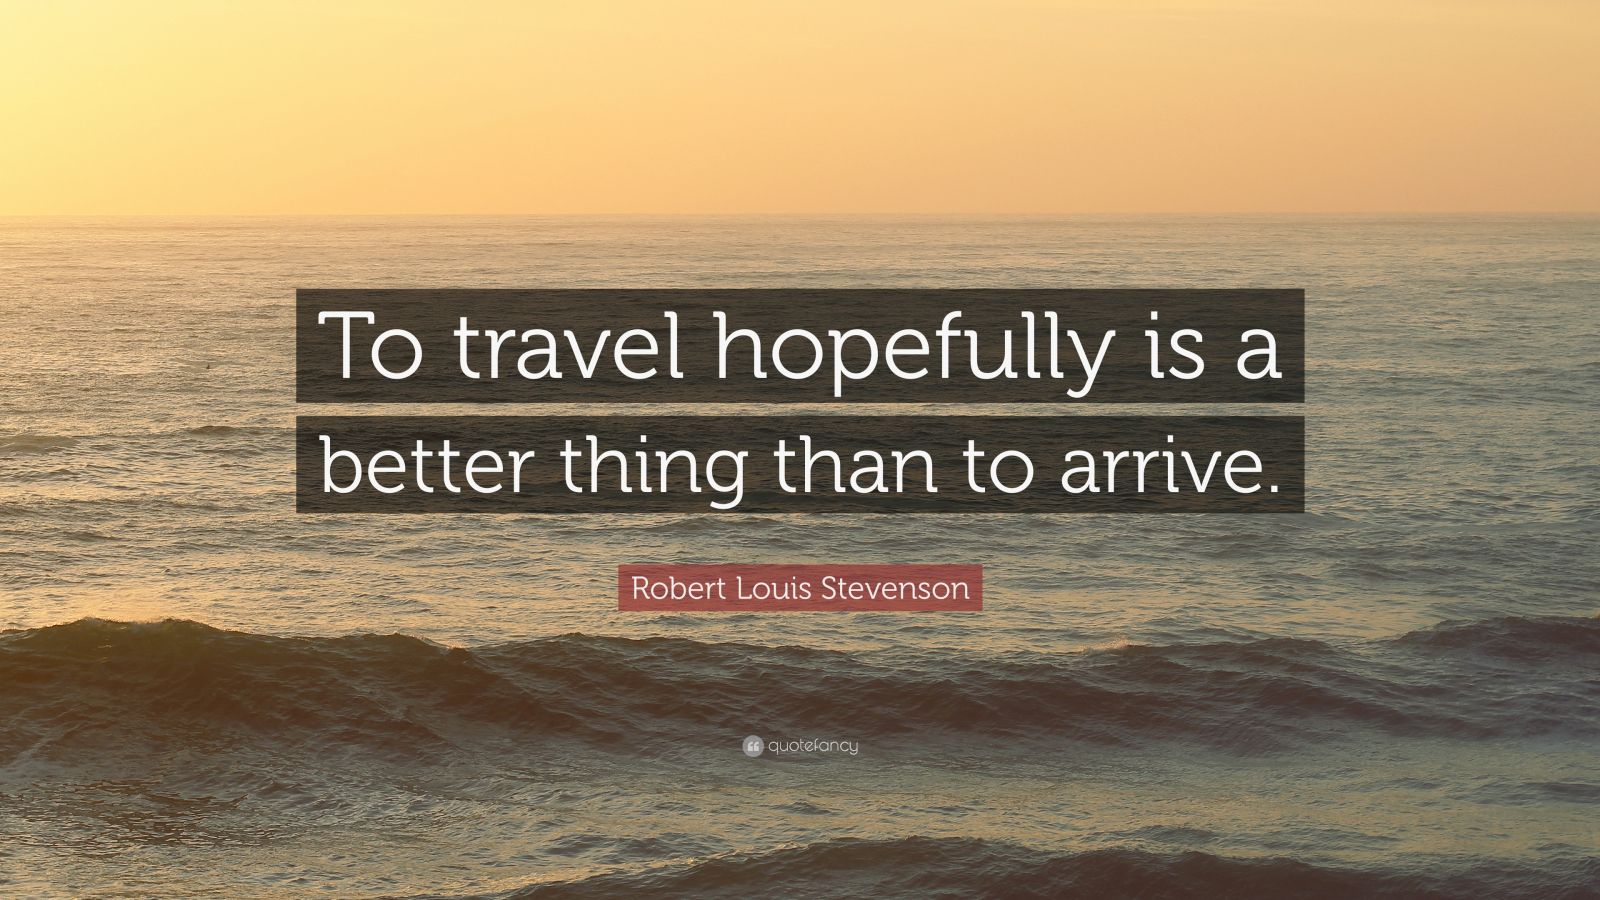 Robert Louis Stevenson Quote: “To travel hopefully is a better thing